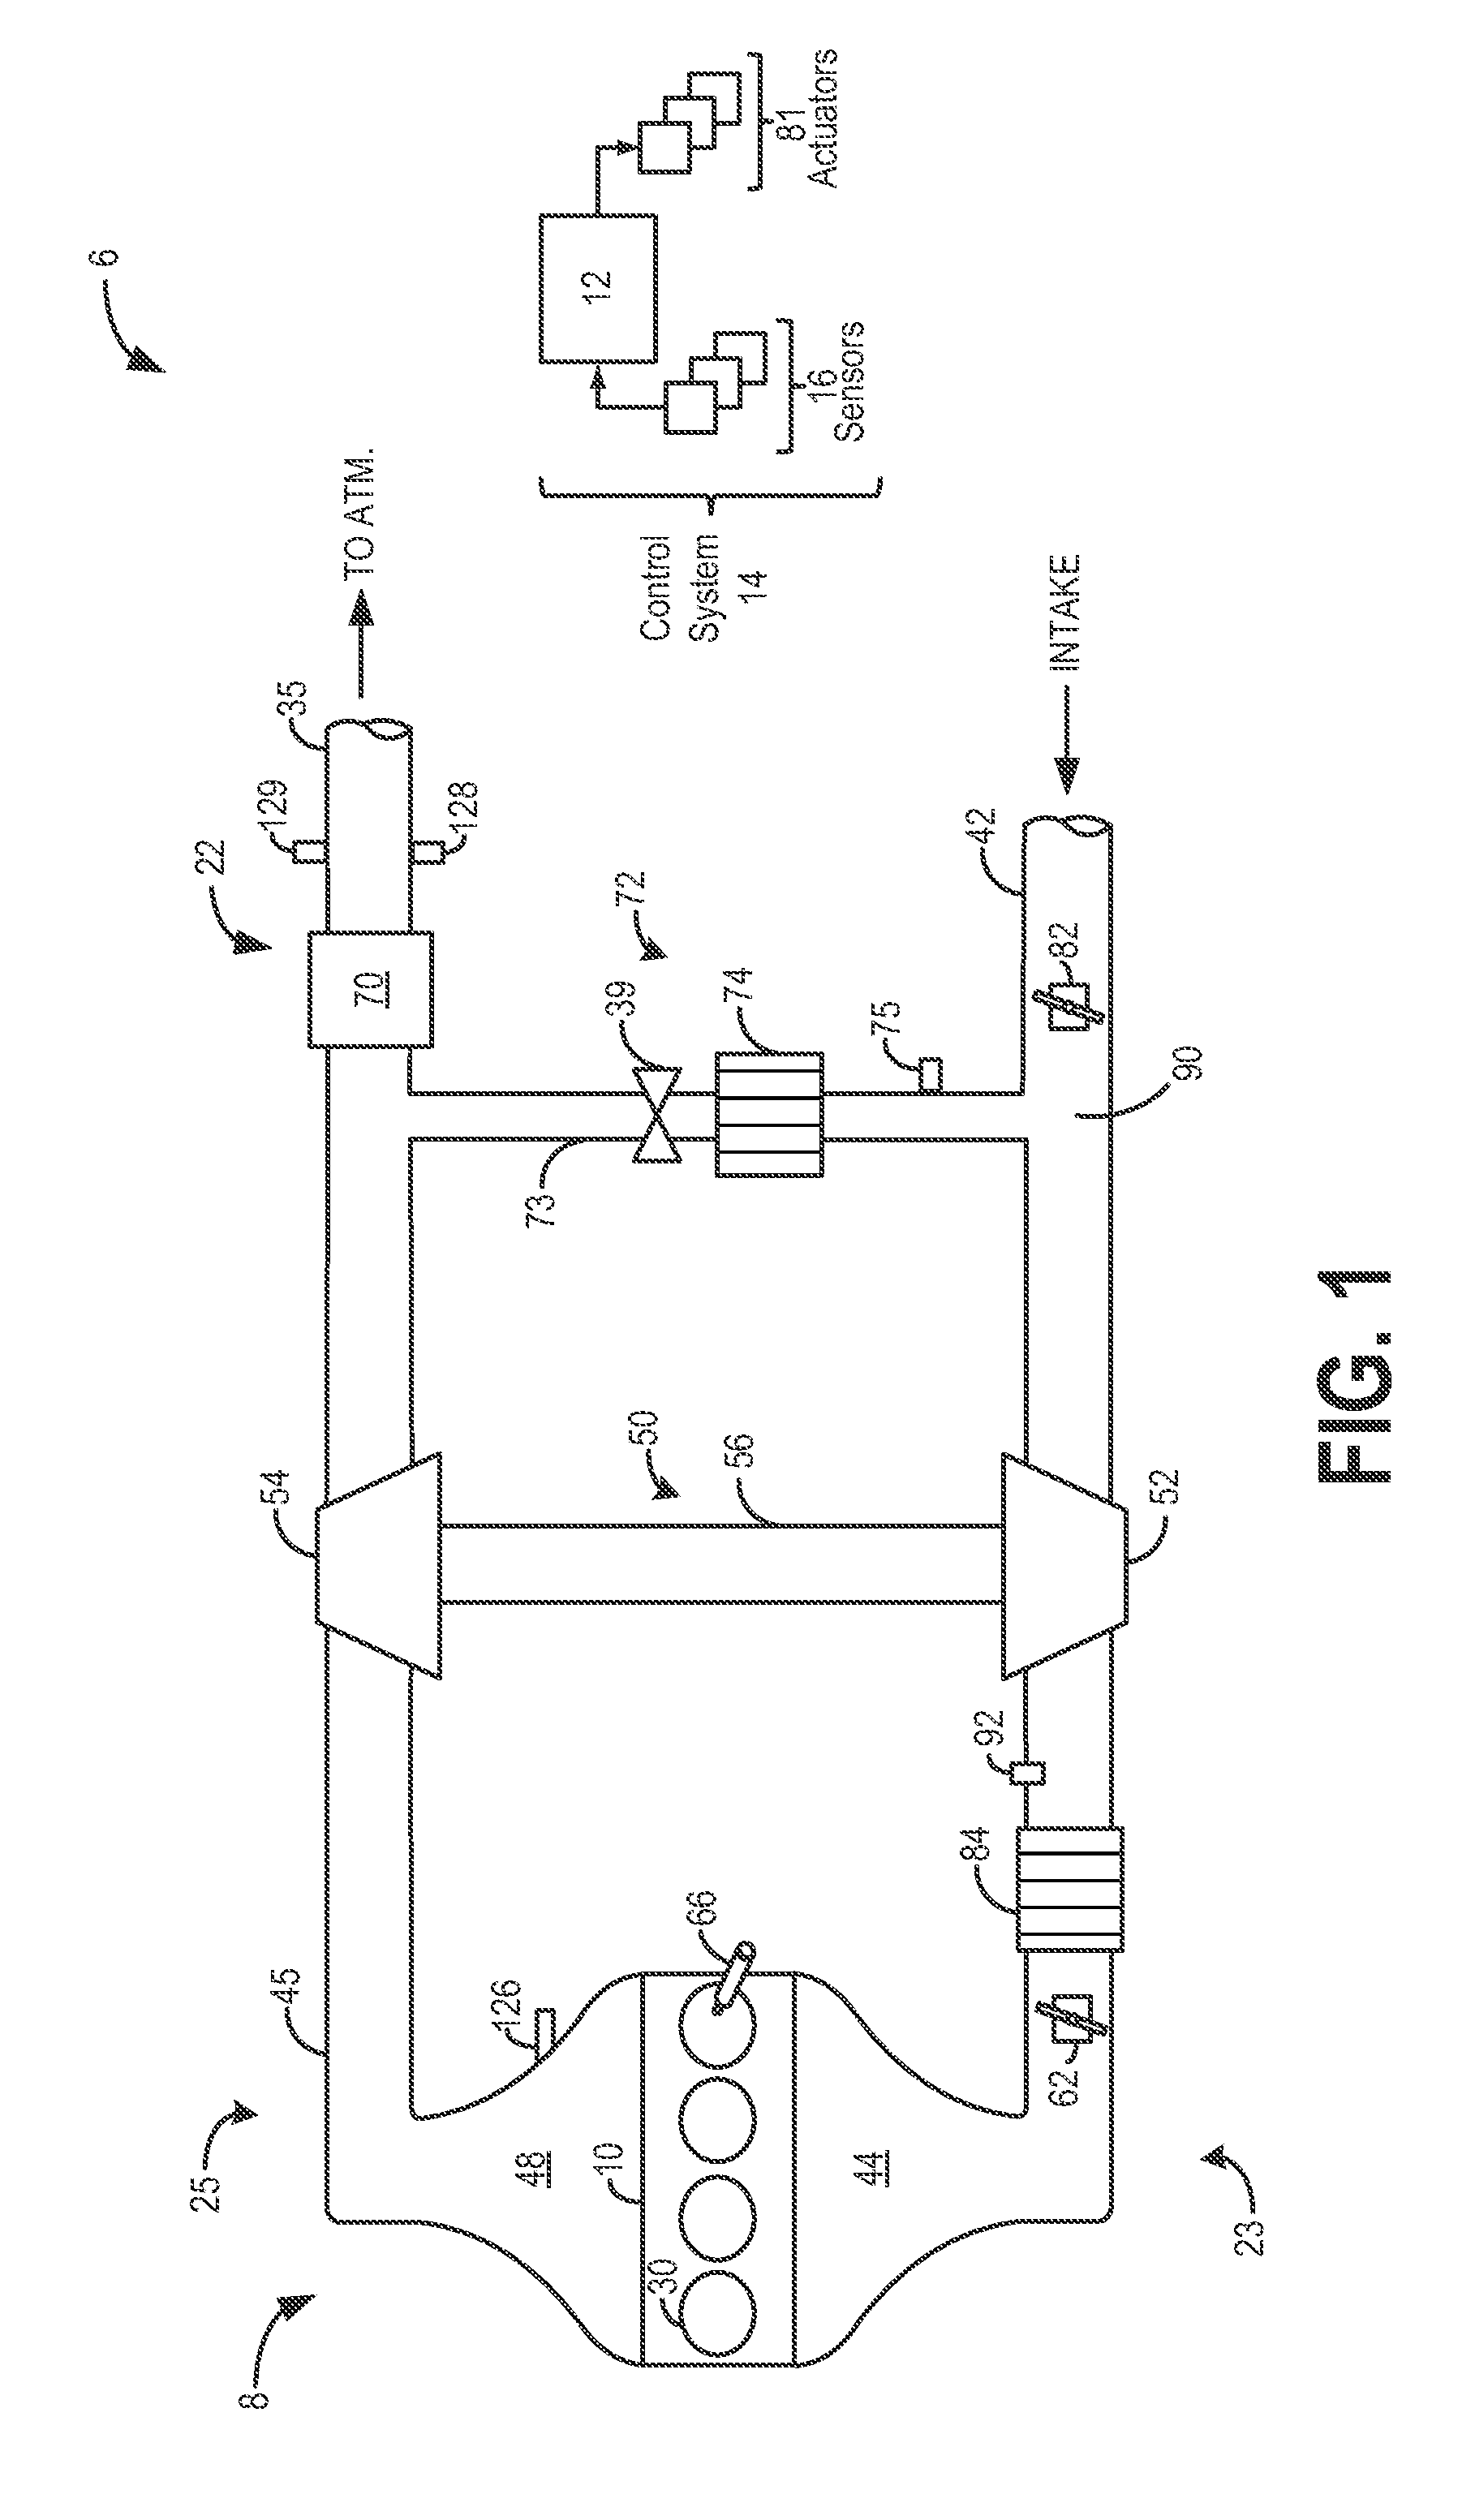 Method and system for exhaust gas recirculation control